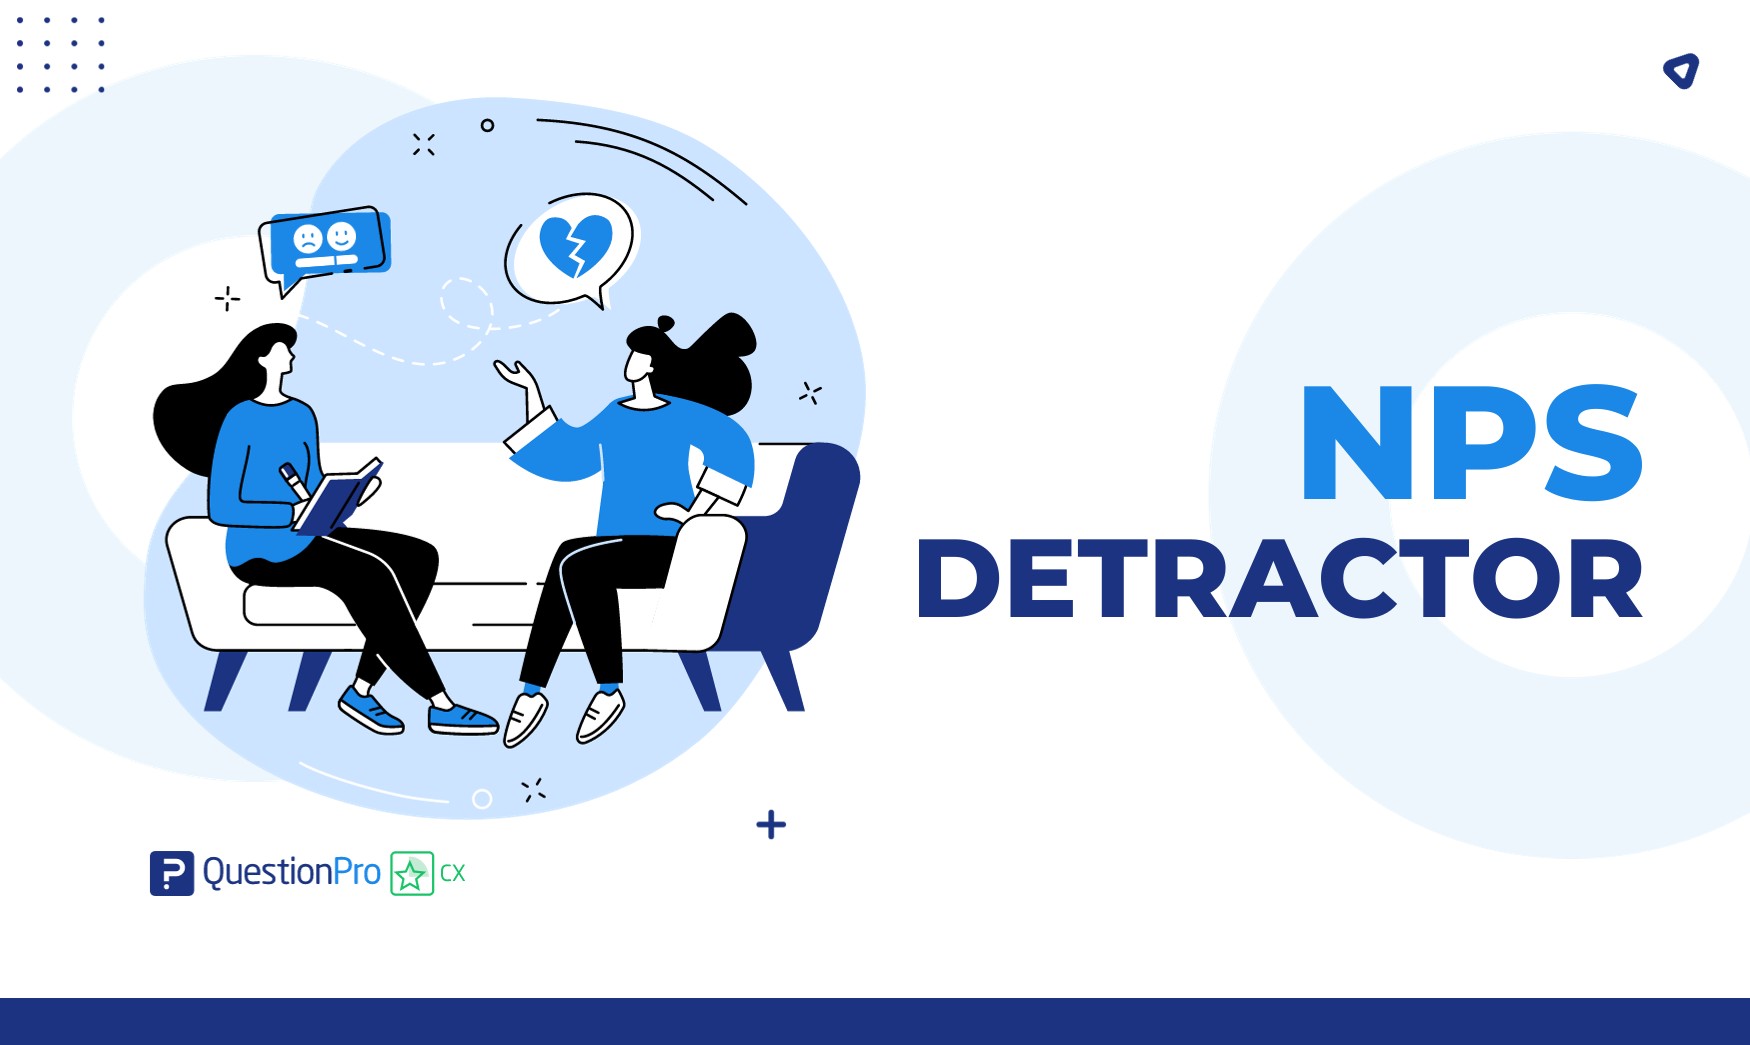 A NPS detractor is an unhappy customer. Learn how to identify them, understand them, and the best practices to turn them into promoters.